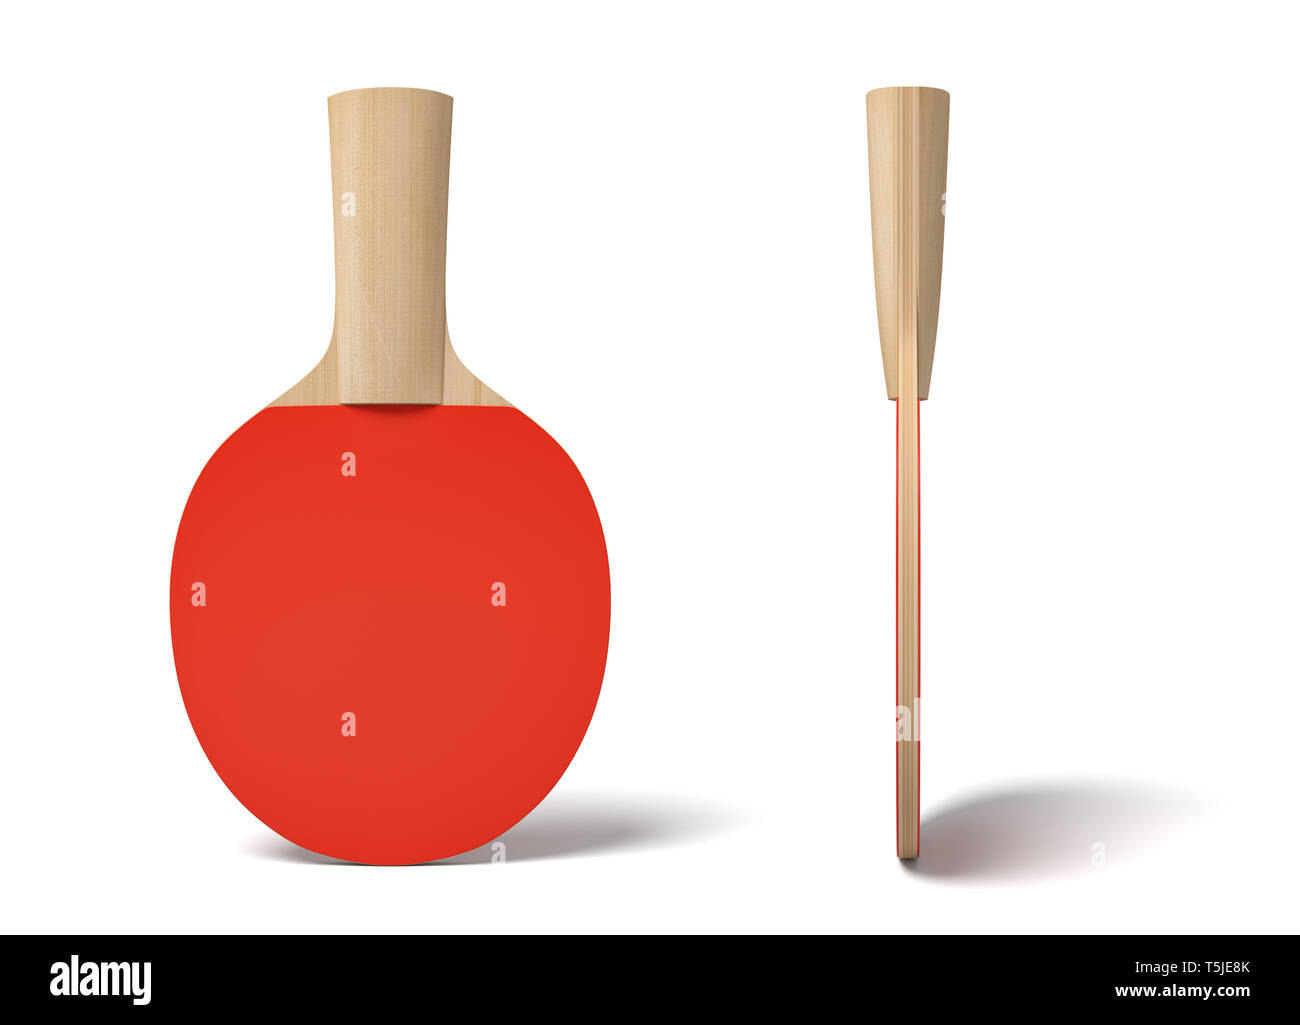 3d close-up rendering of ping pong racket with wooden handle and red rubber on white background. Stock Photo